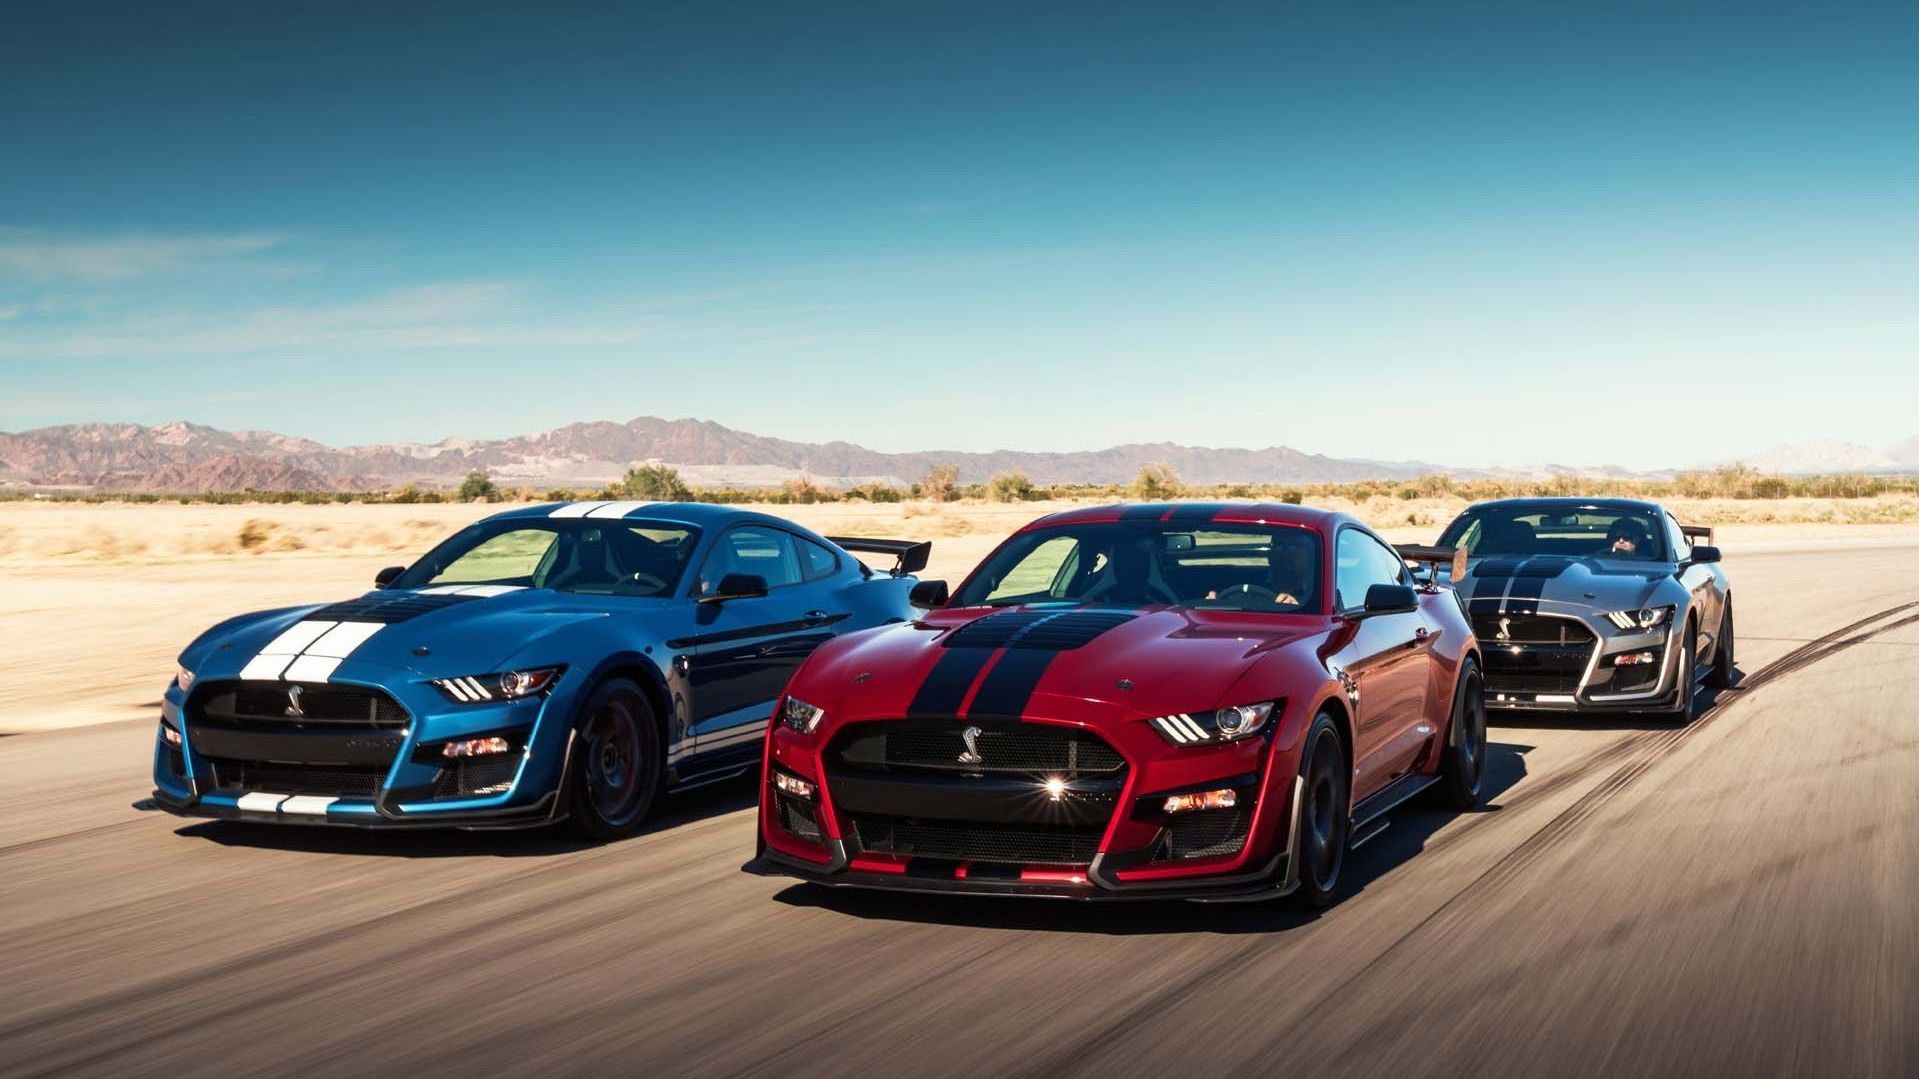 2020 Mustang Shelby GT500s on track